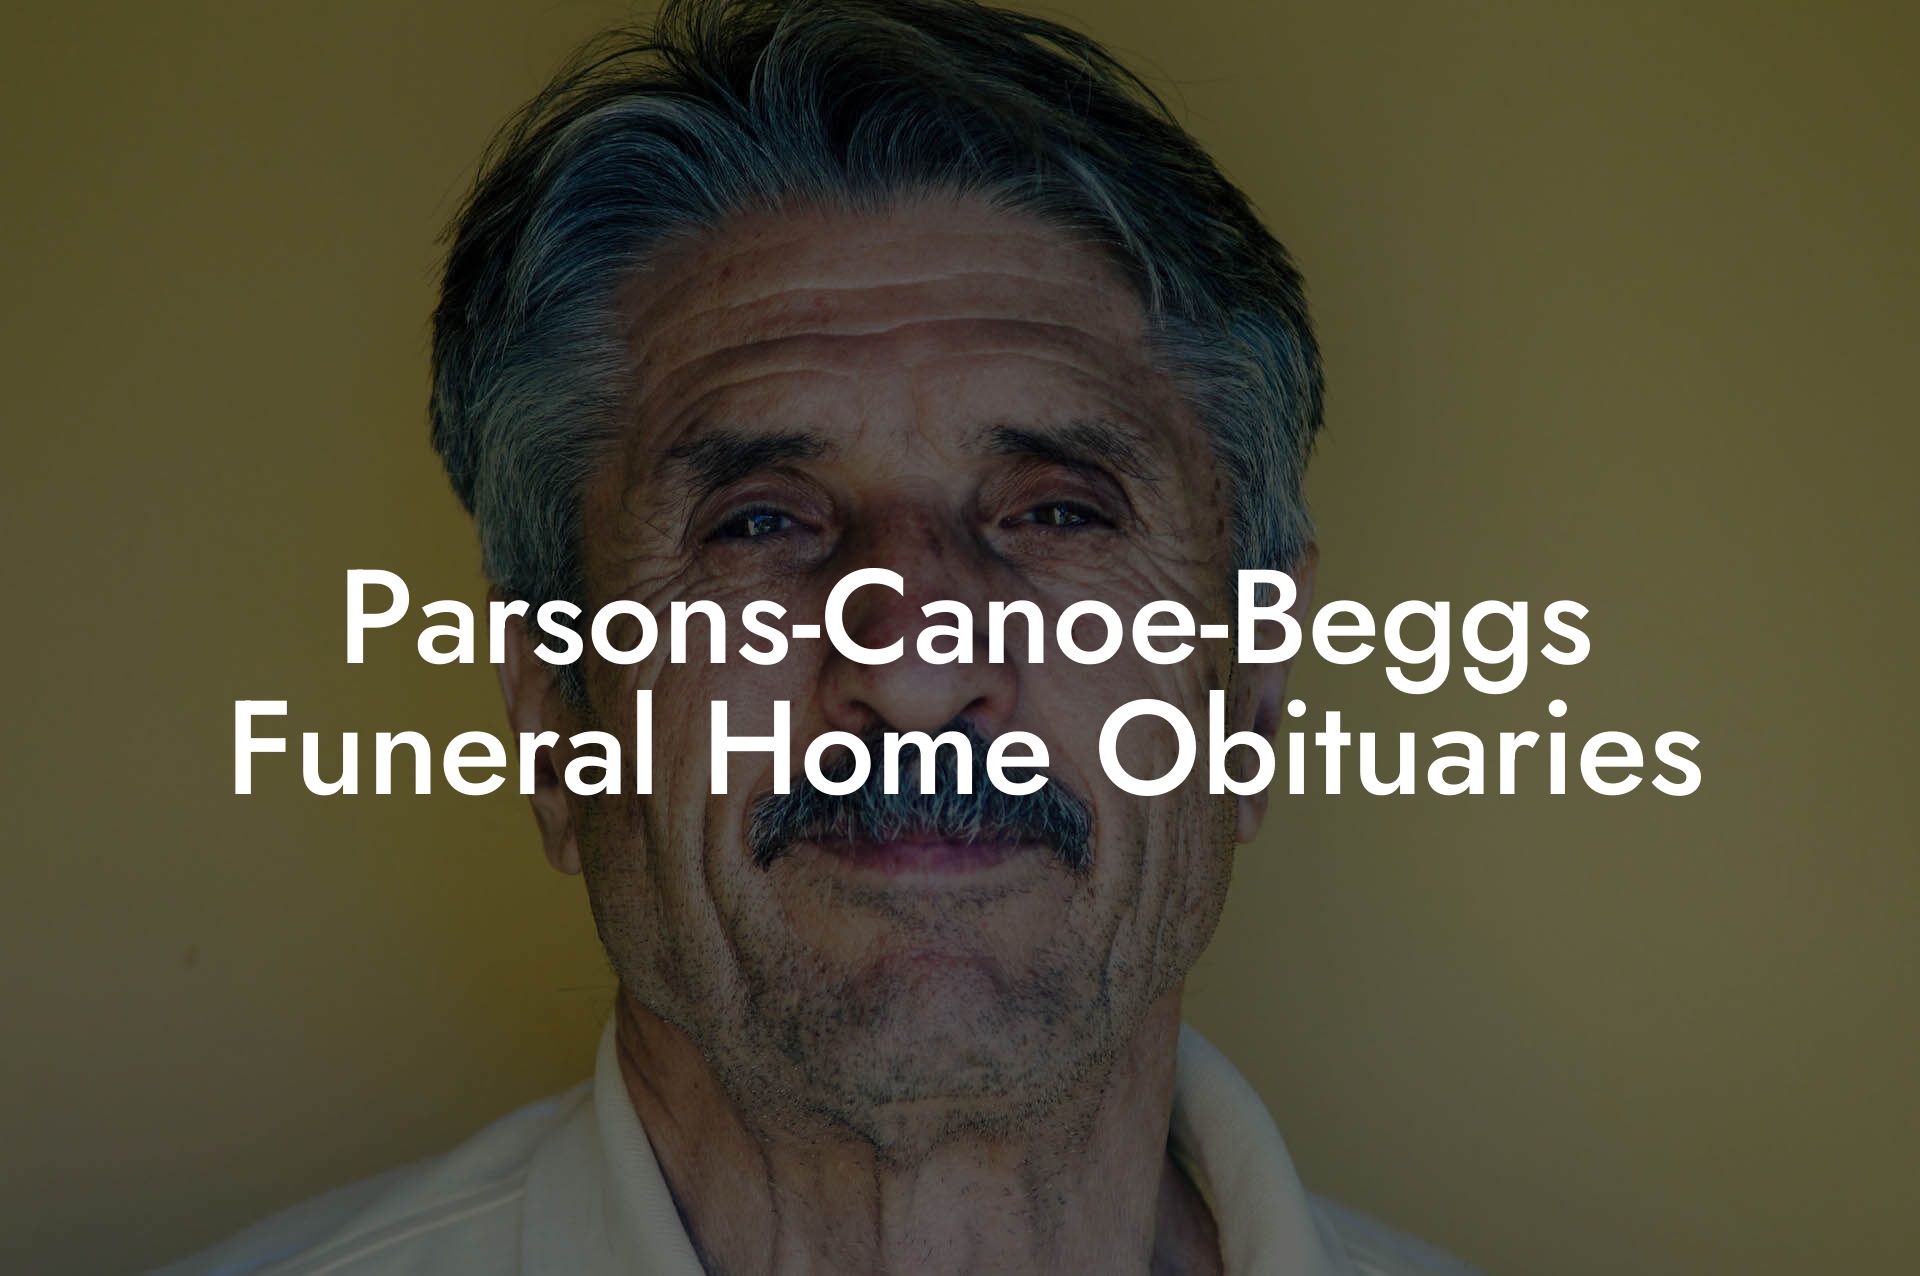 Parsons-Canoe-Beggs Funeral Home Obituaries